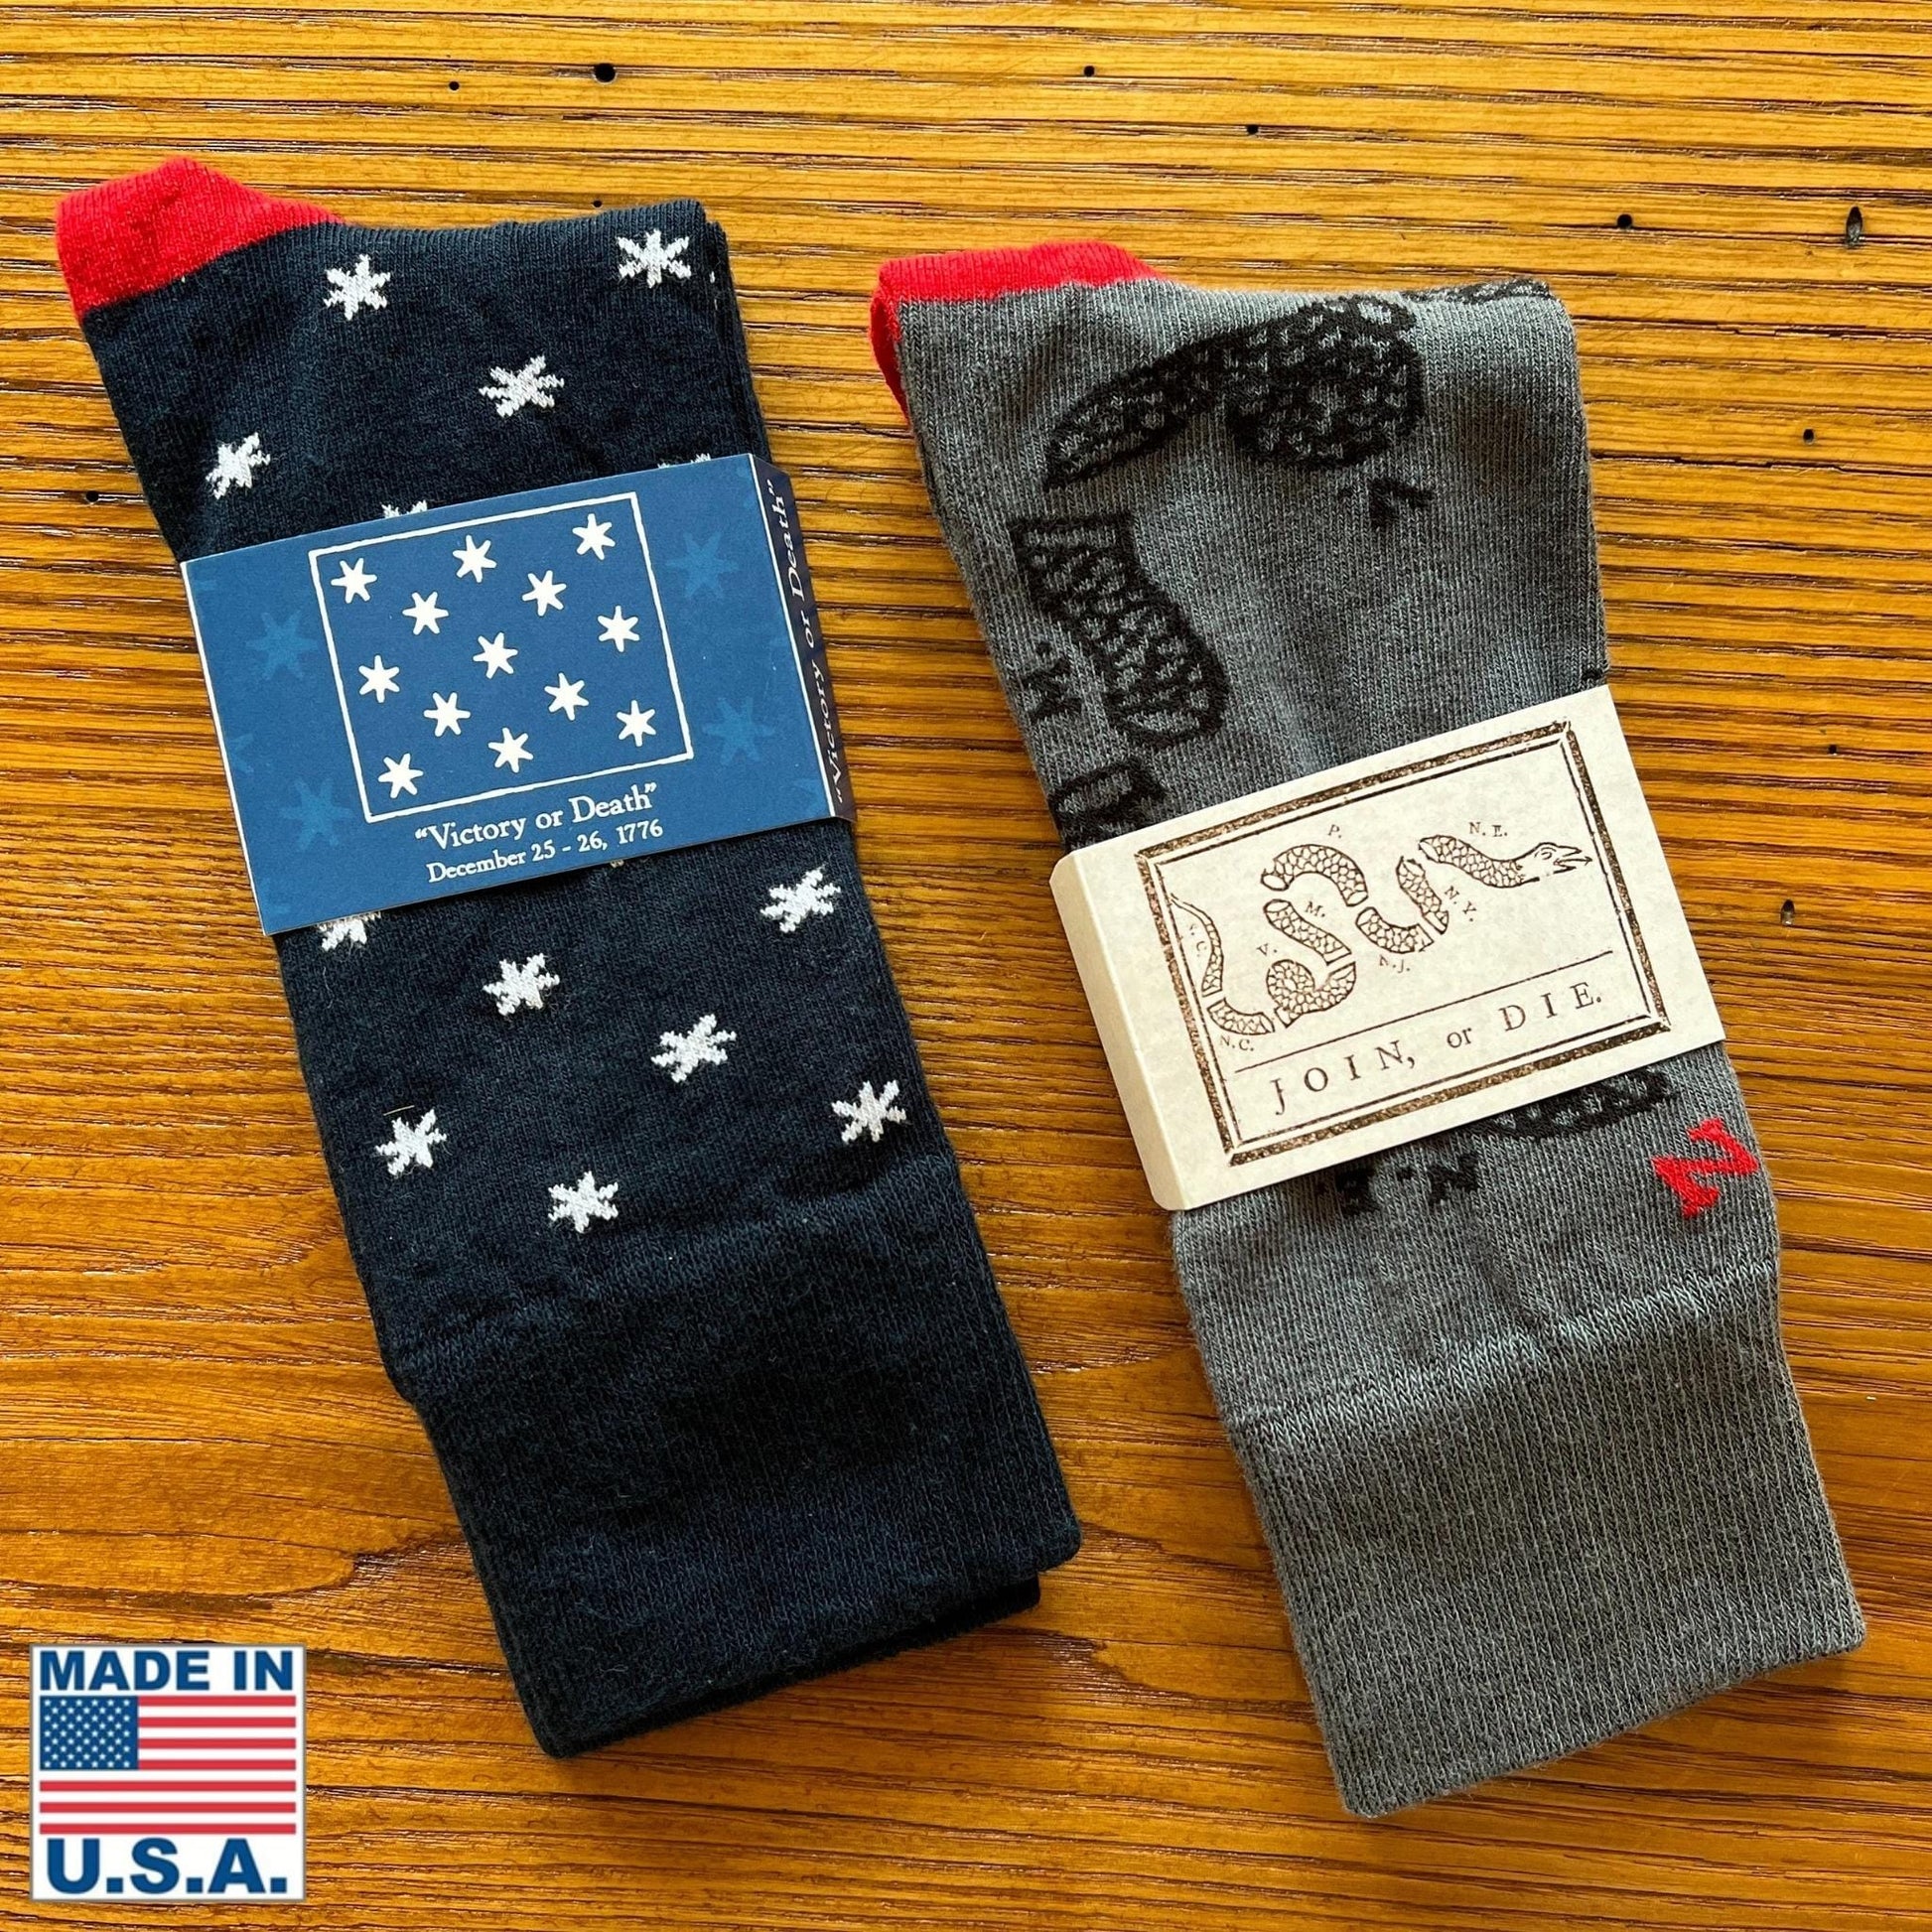 A pair of "Victory or Death" Socks and "Join or Die" socks — Made in USA from The History List store